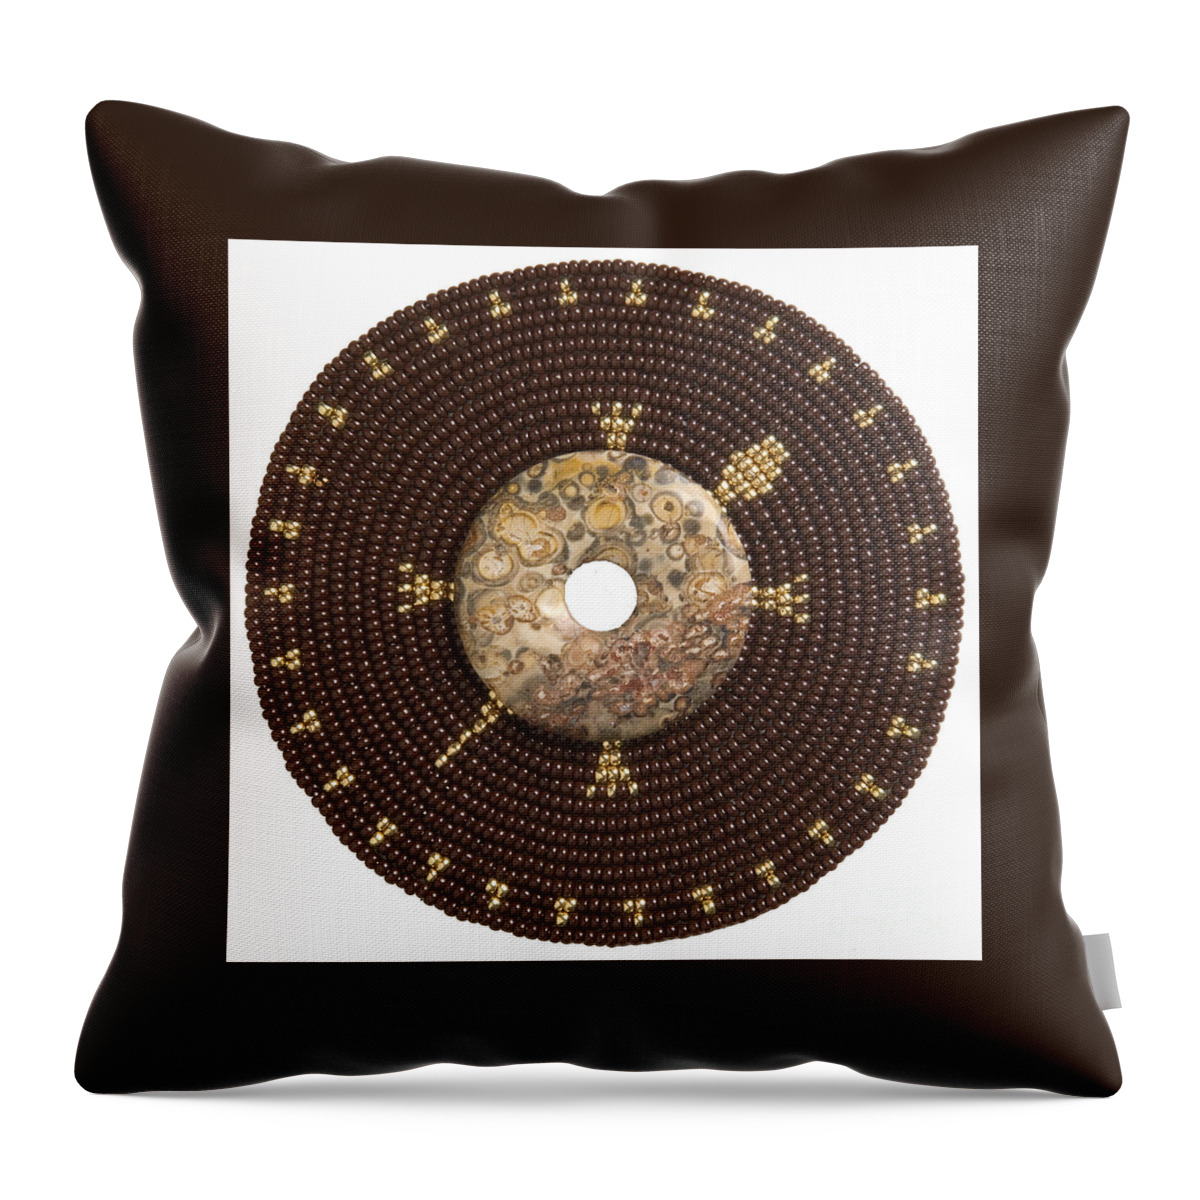 Glass Beads Throw Pillow featuring the digital art Picture Jasper by Douglas Limon